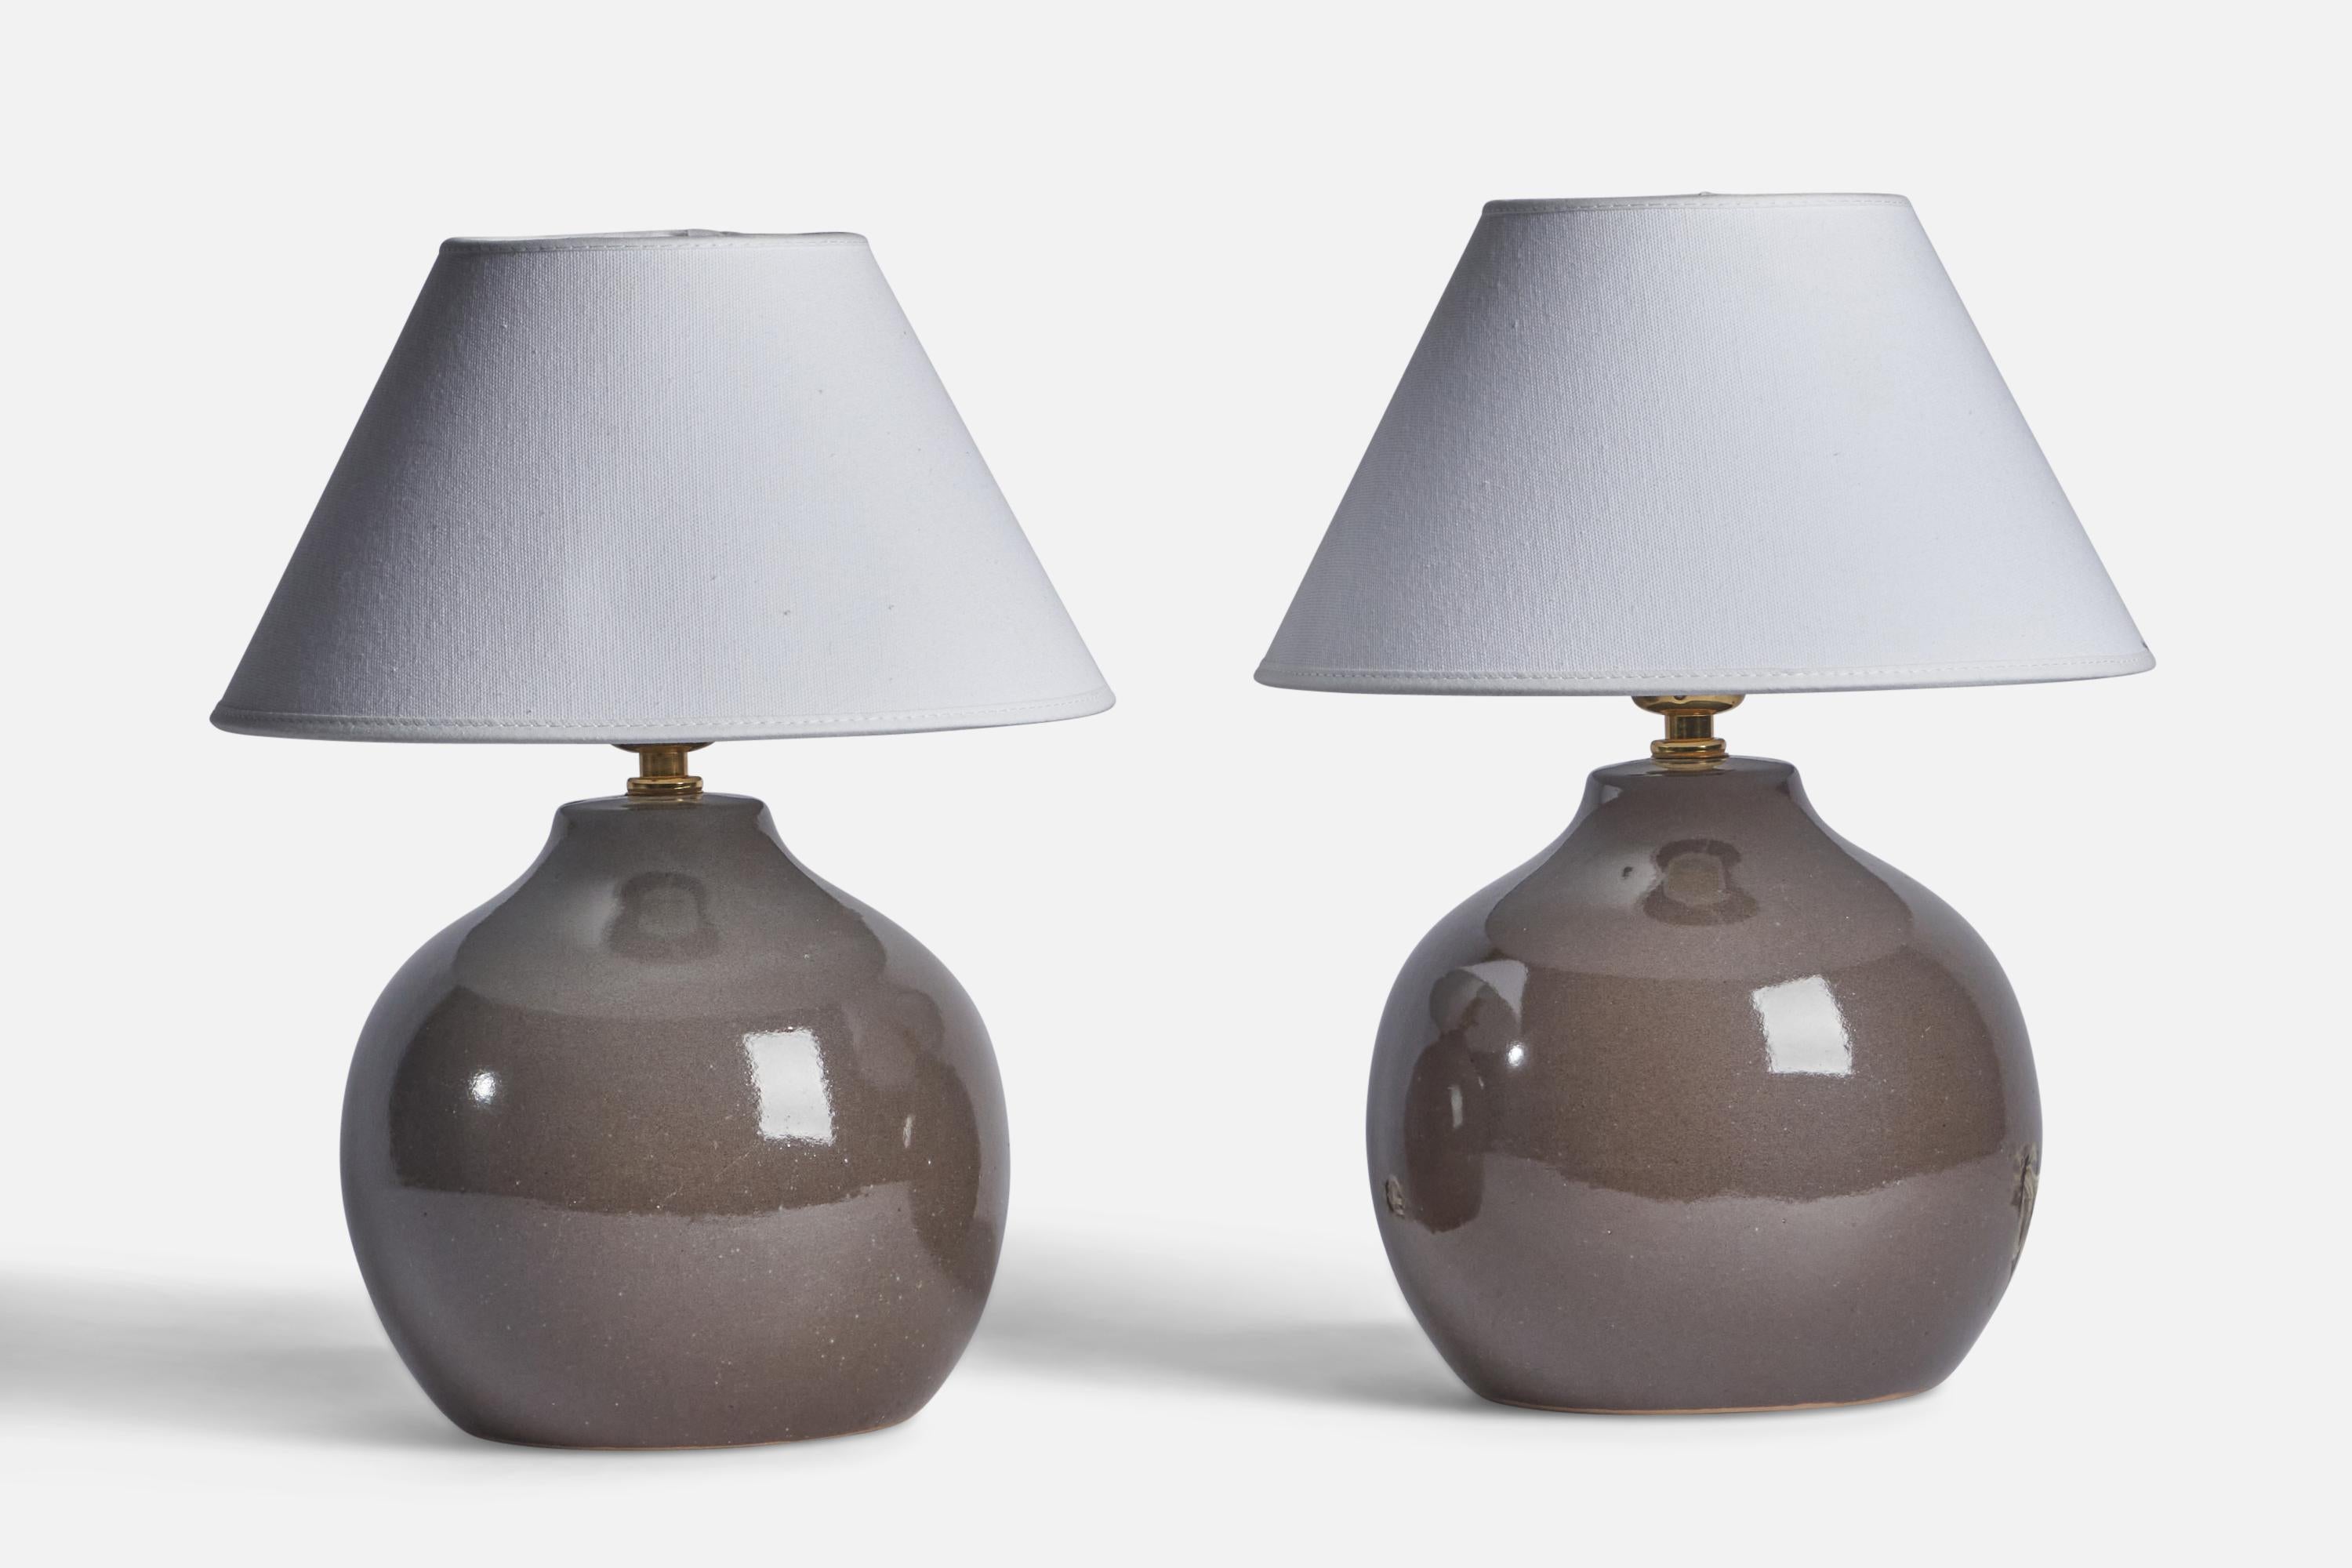 A pair of grey-glazed ceramic table lamps designed by Jane & Gordon Martz and produced by Marshall Studios, USA, 1960s.

Dimensions of Lamp (inches): 9.75” H x 7.25” Diameter

Dimensions of Shade (inches): 4.5” Top Diameter x 10” Bottom Diameter x